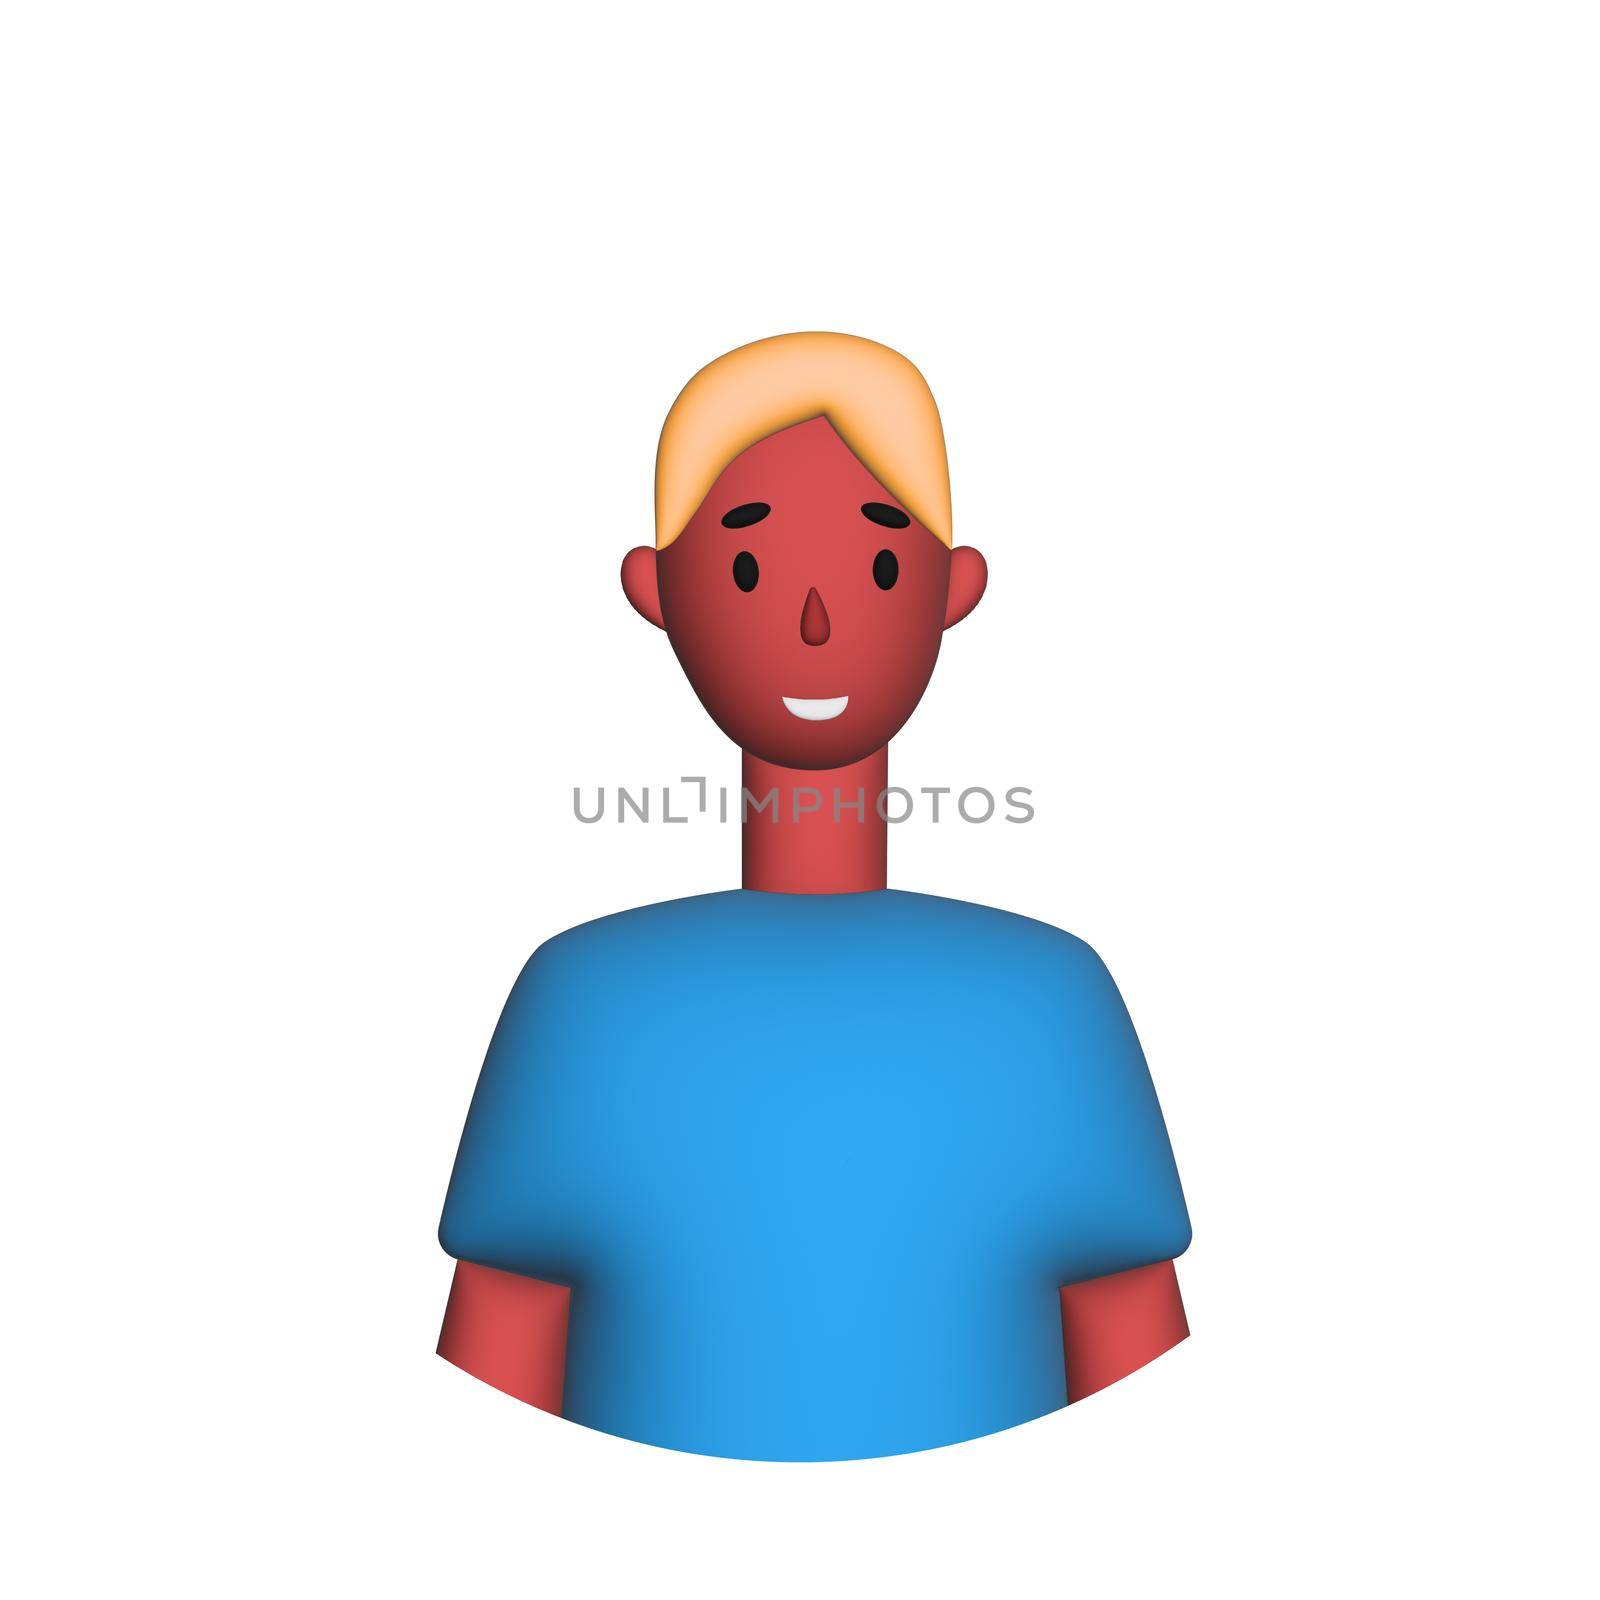 Web icon man, middle-aged man with blond hair - illustration